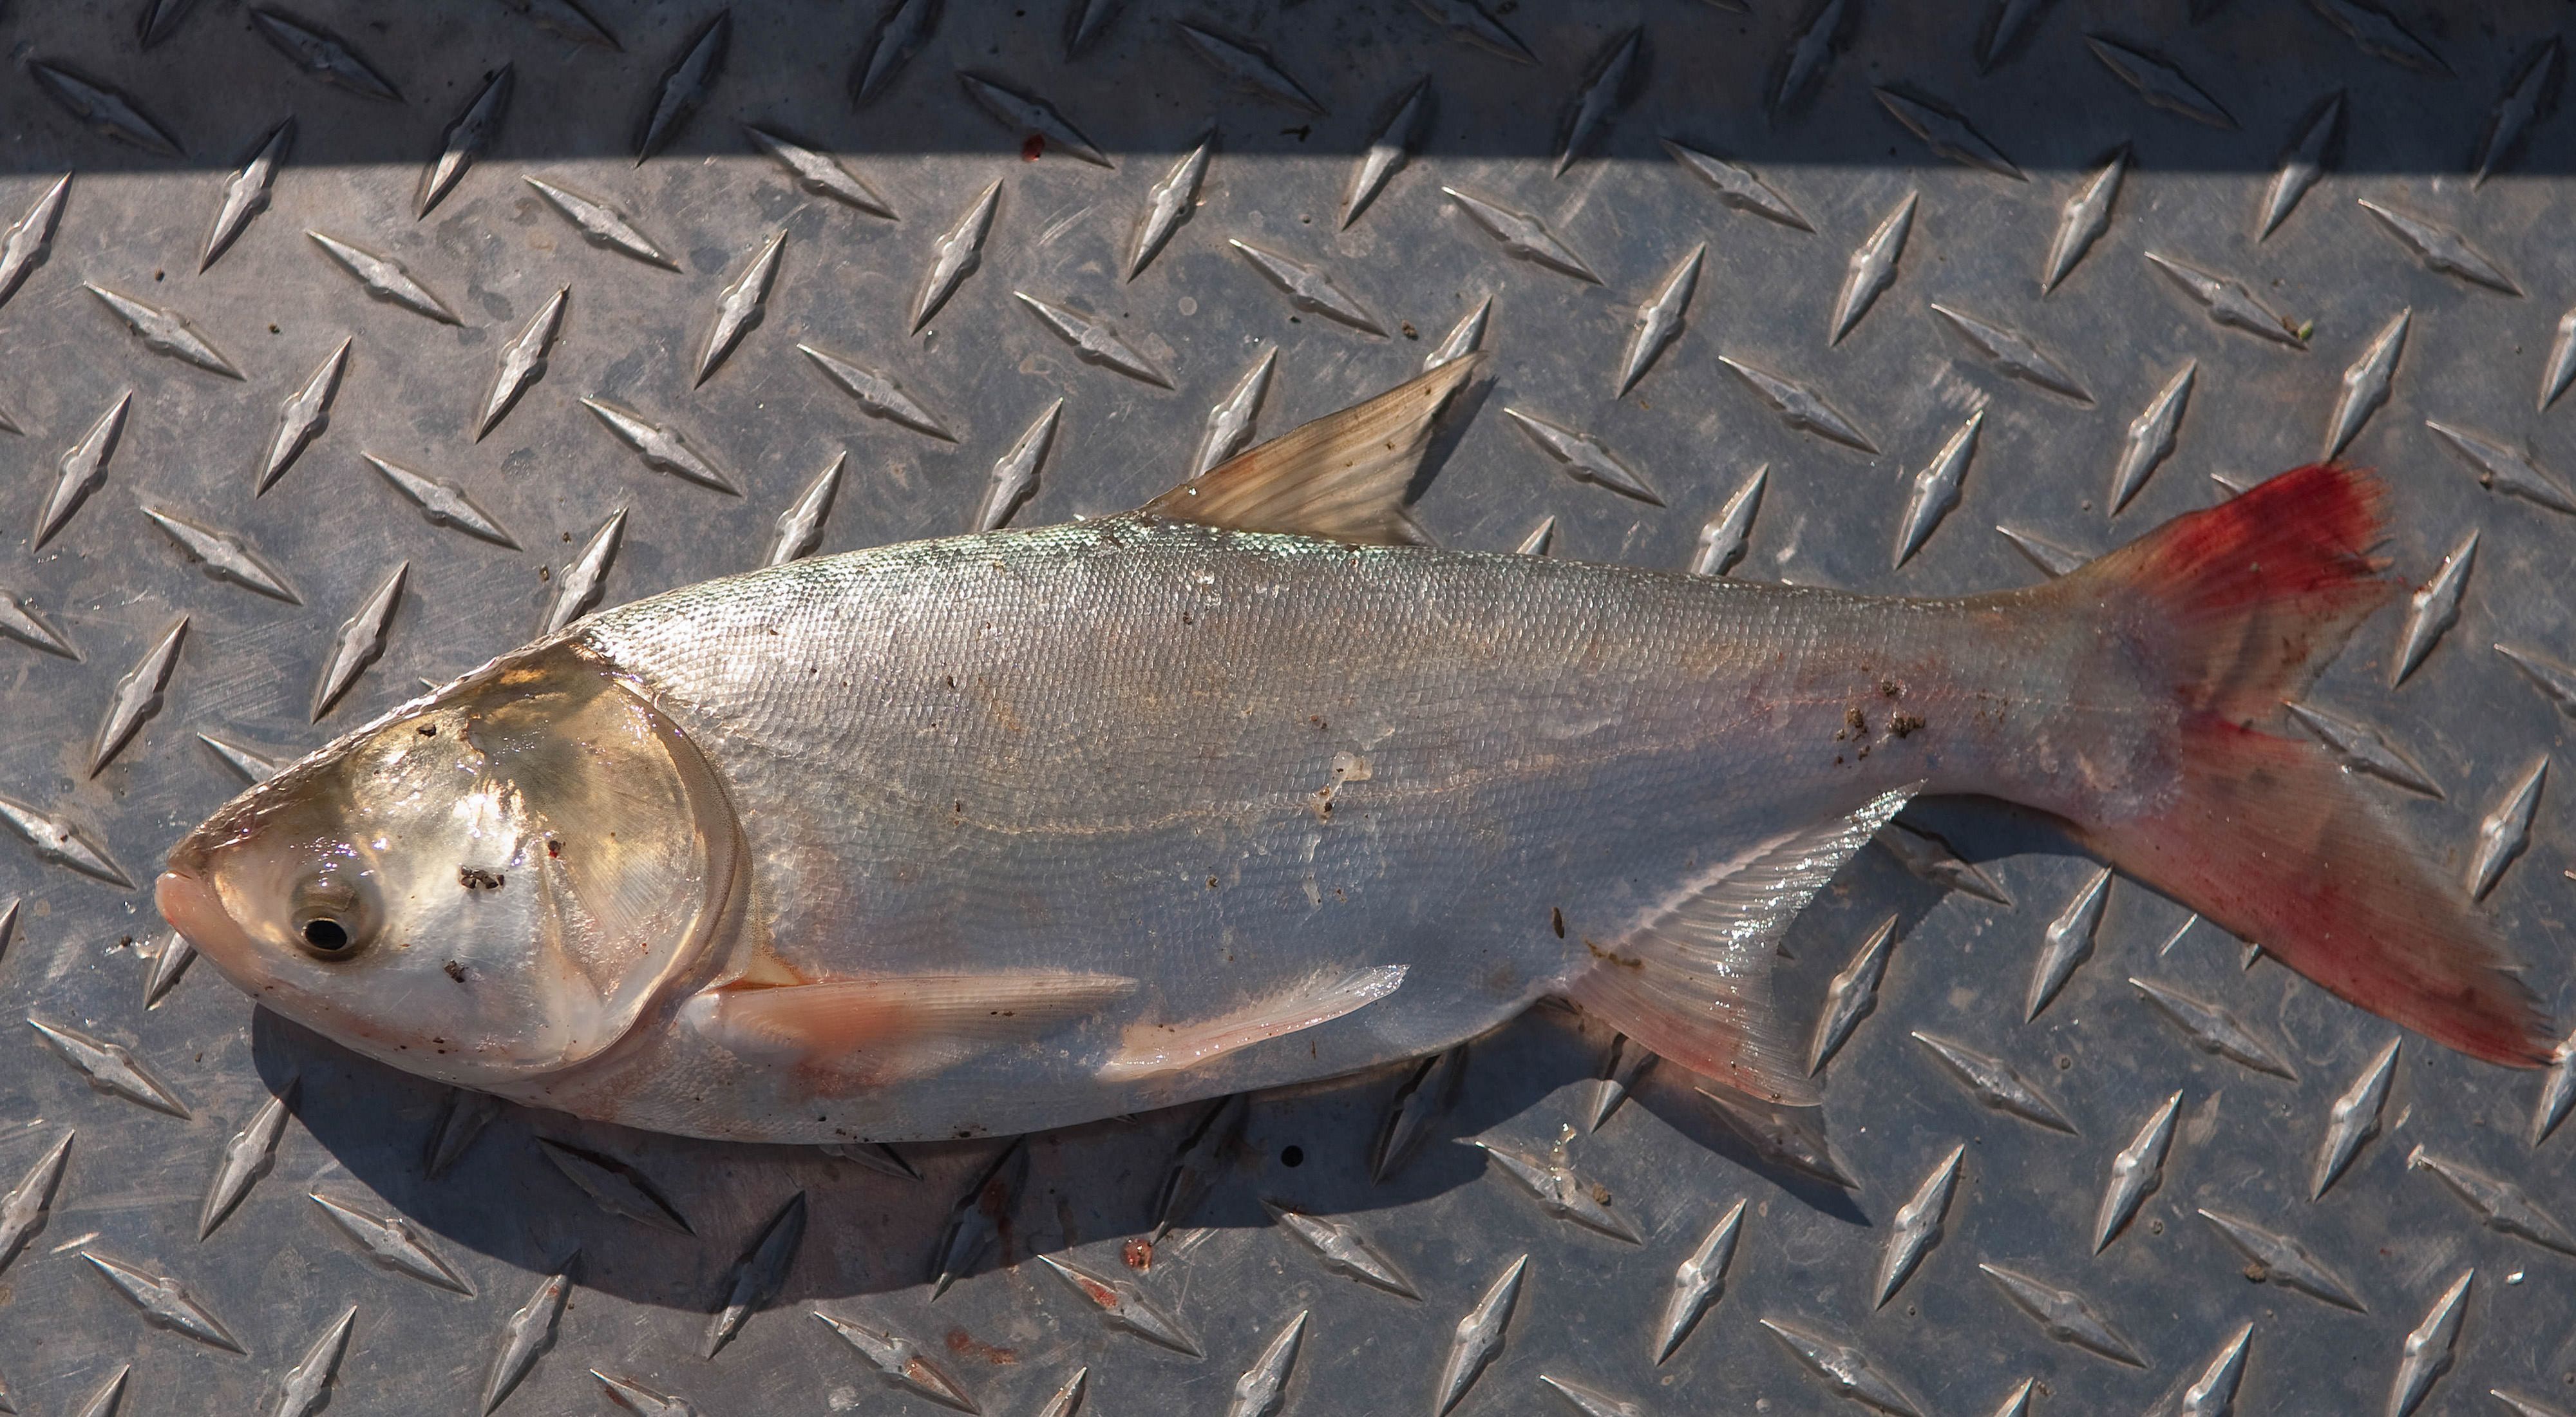 A large asian carp on the deck of a boat